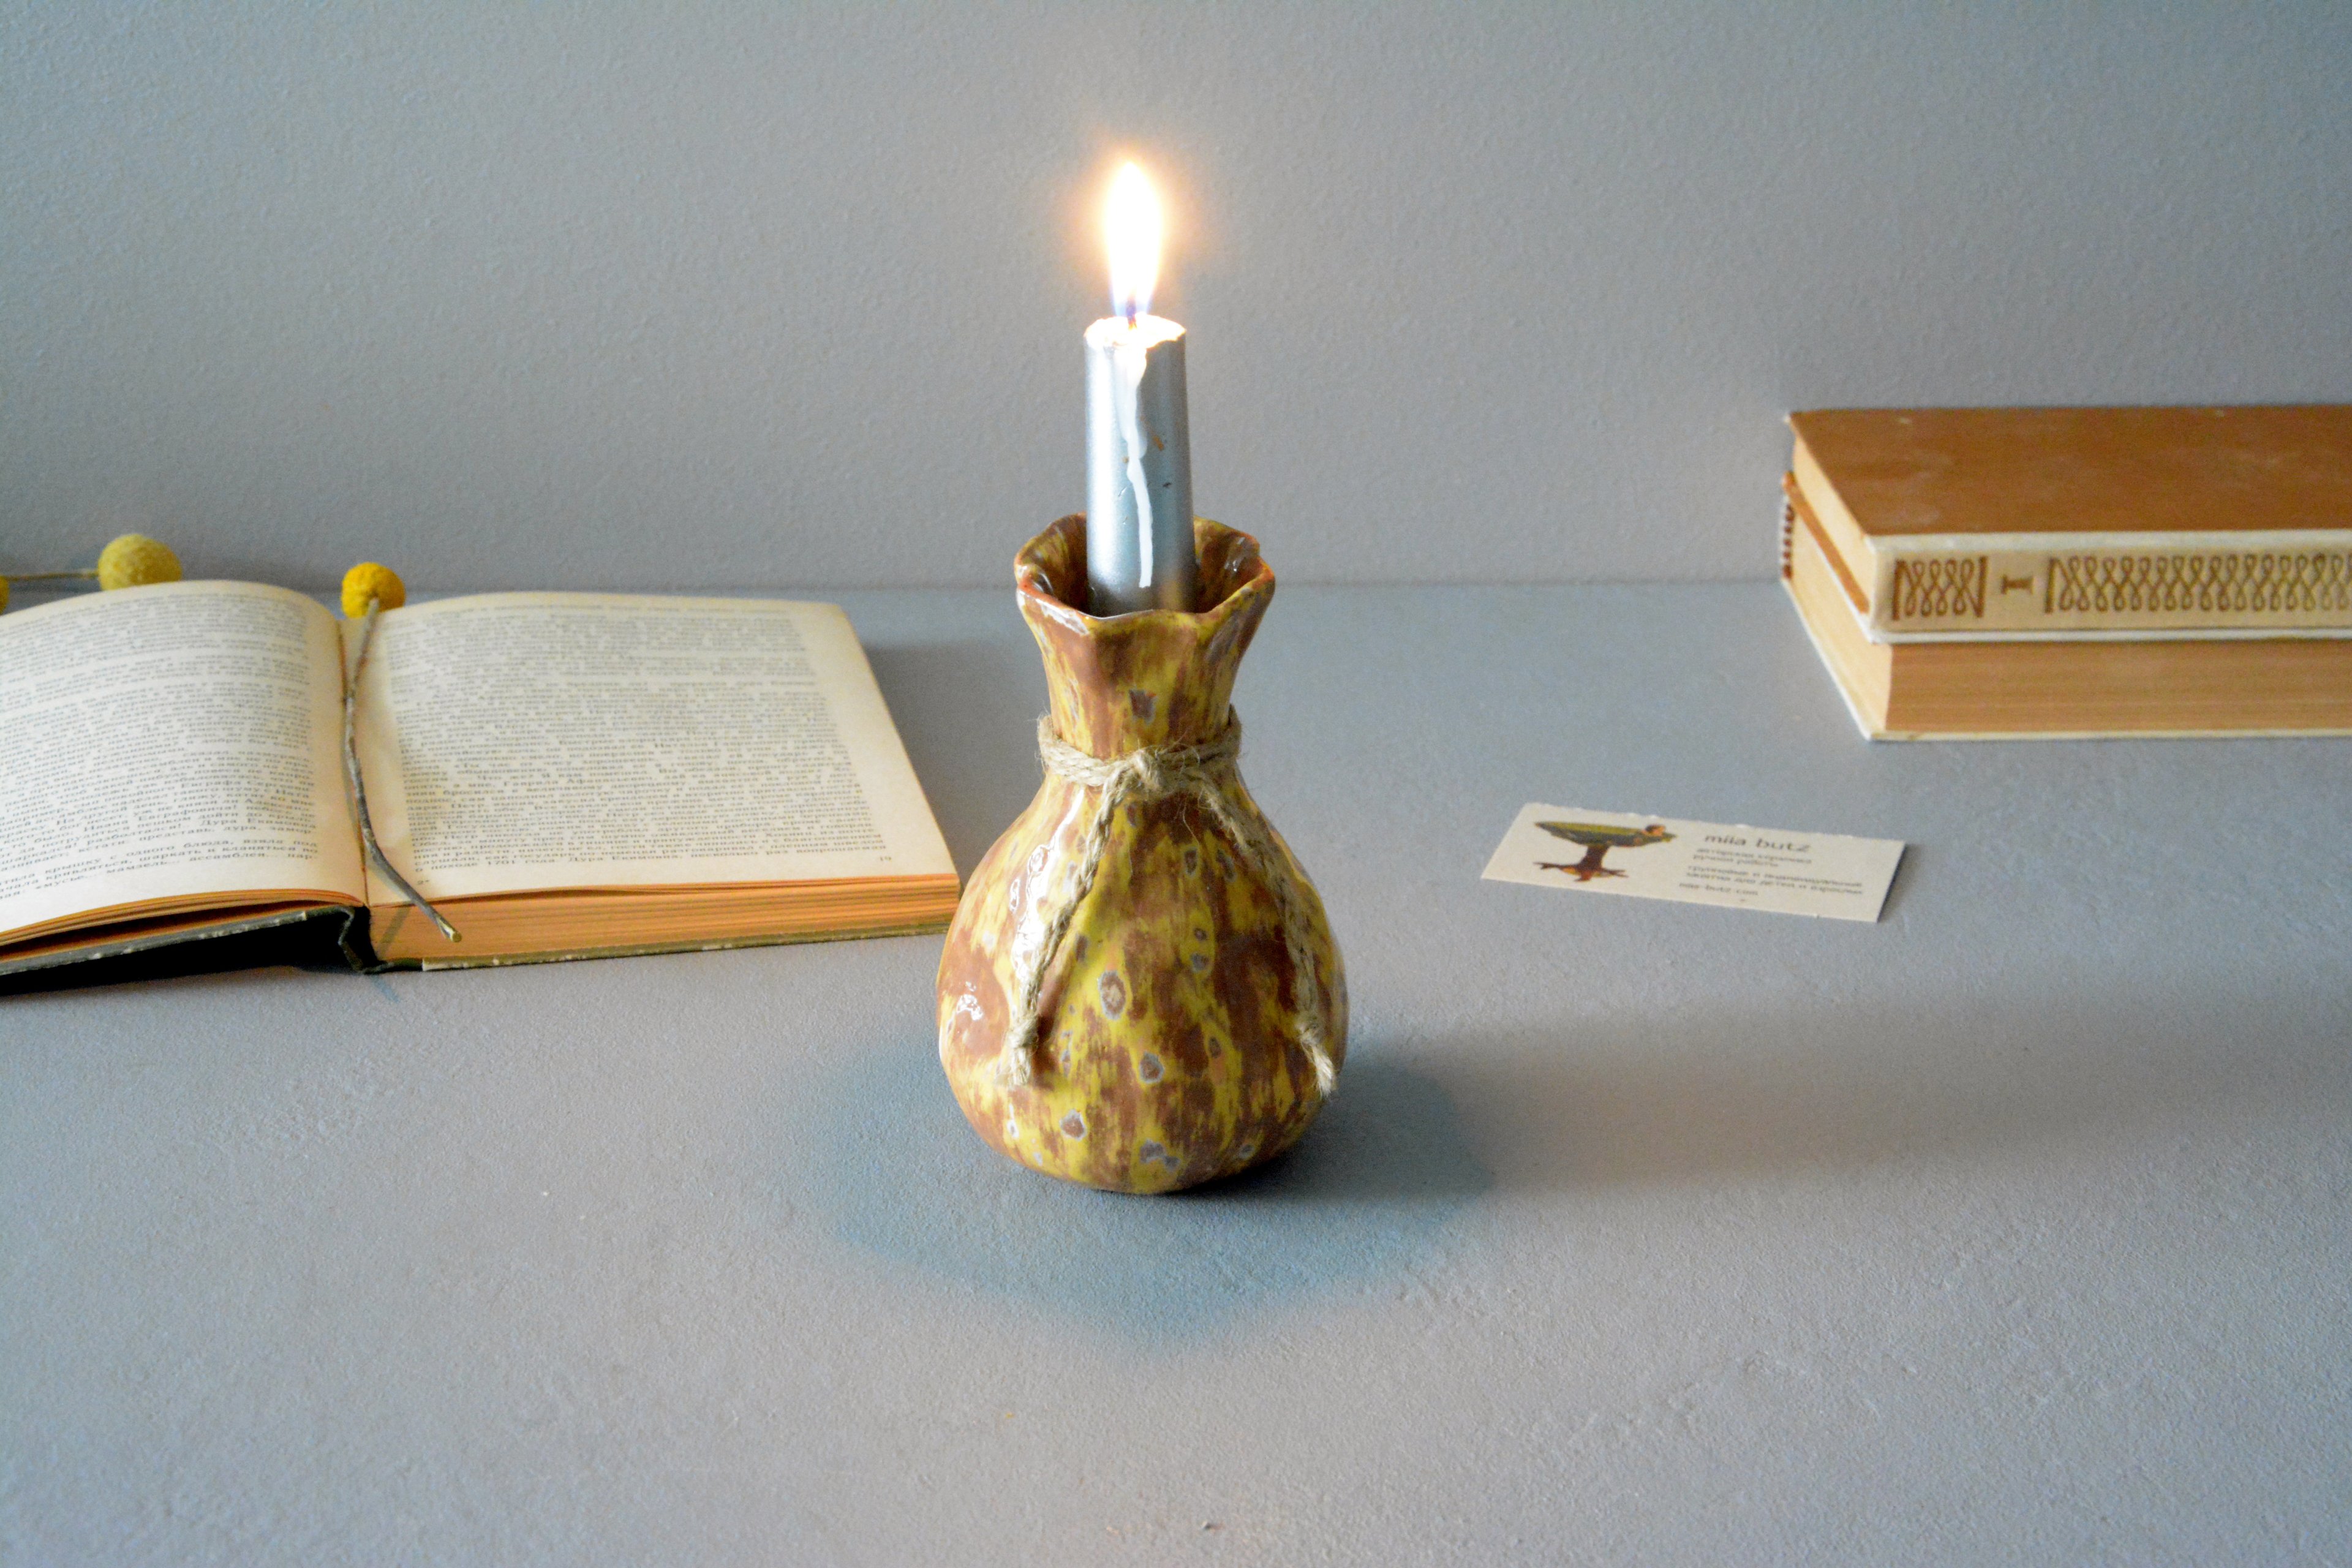 Ceramic small vase candlestick yellow-brown bagful, height - 13 cm, photo 5 of 8. 1214.